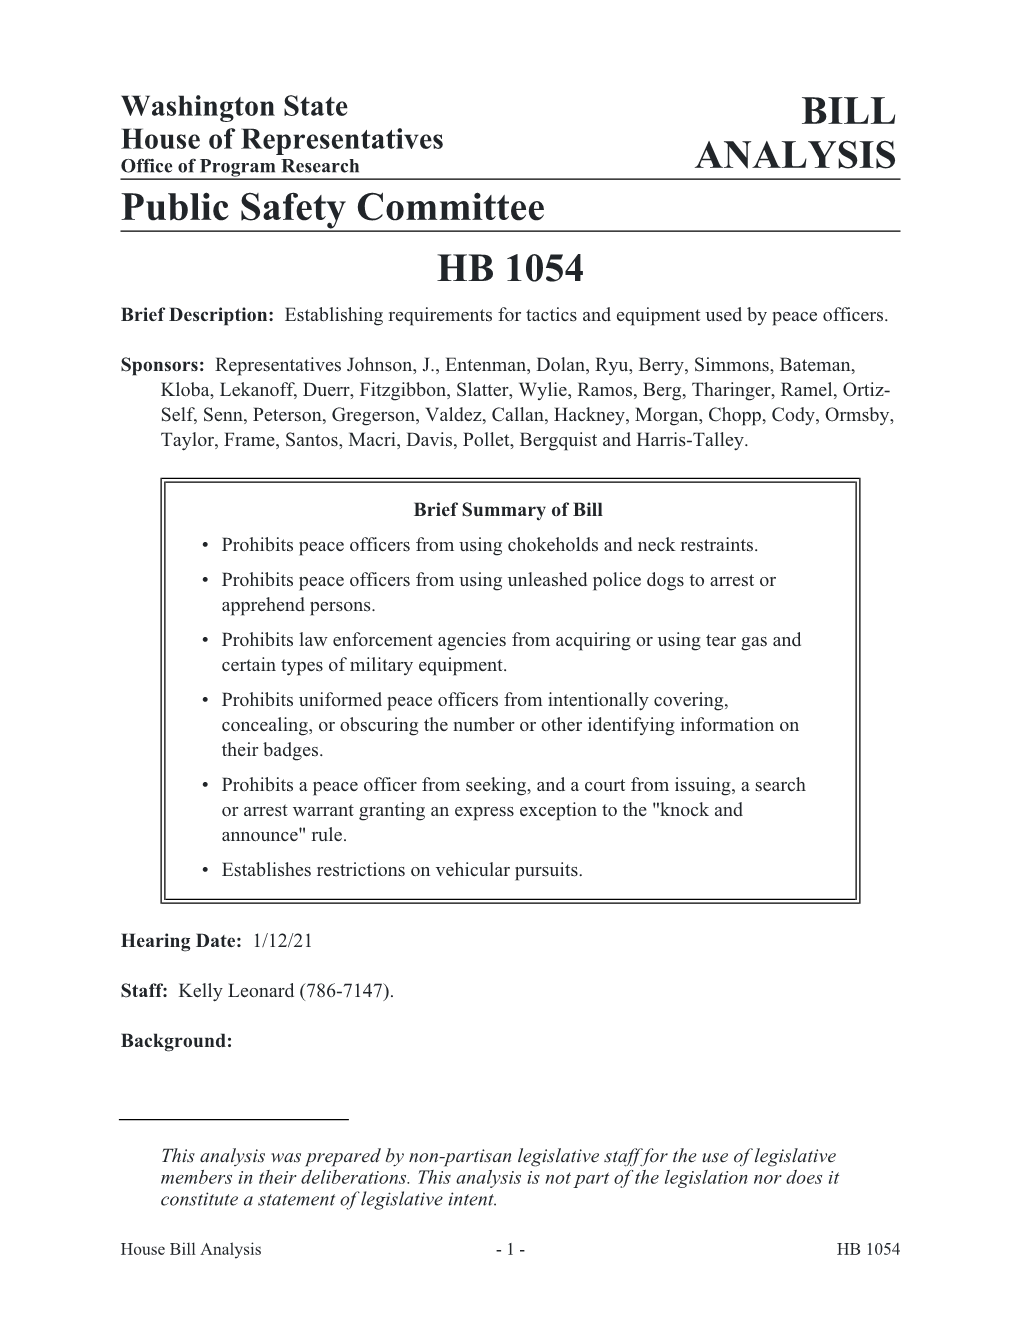 BILL ANALYSIS Public Safety Committee HB 1054